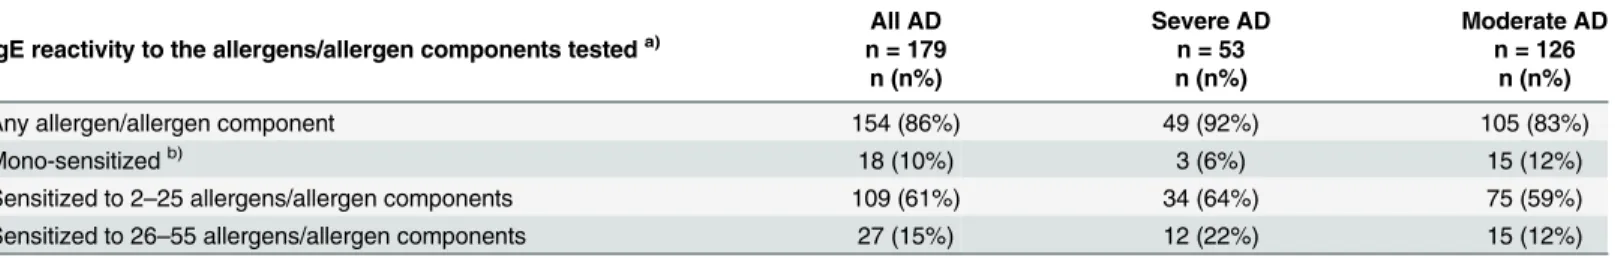 Table 4. Summary of allergen-specific IgE reactivities in the AD patients.